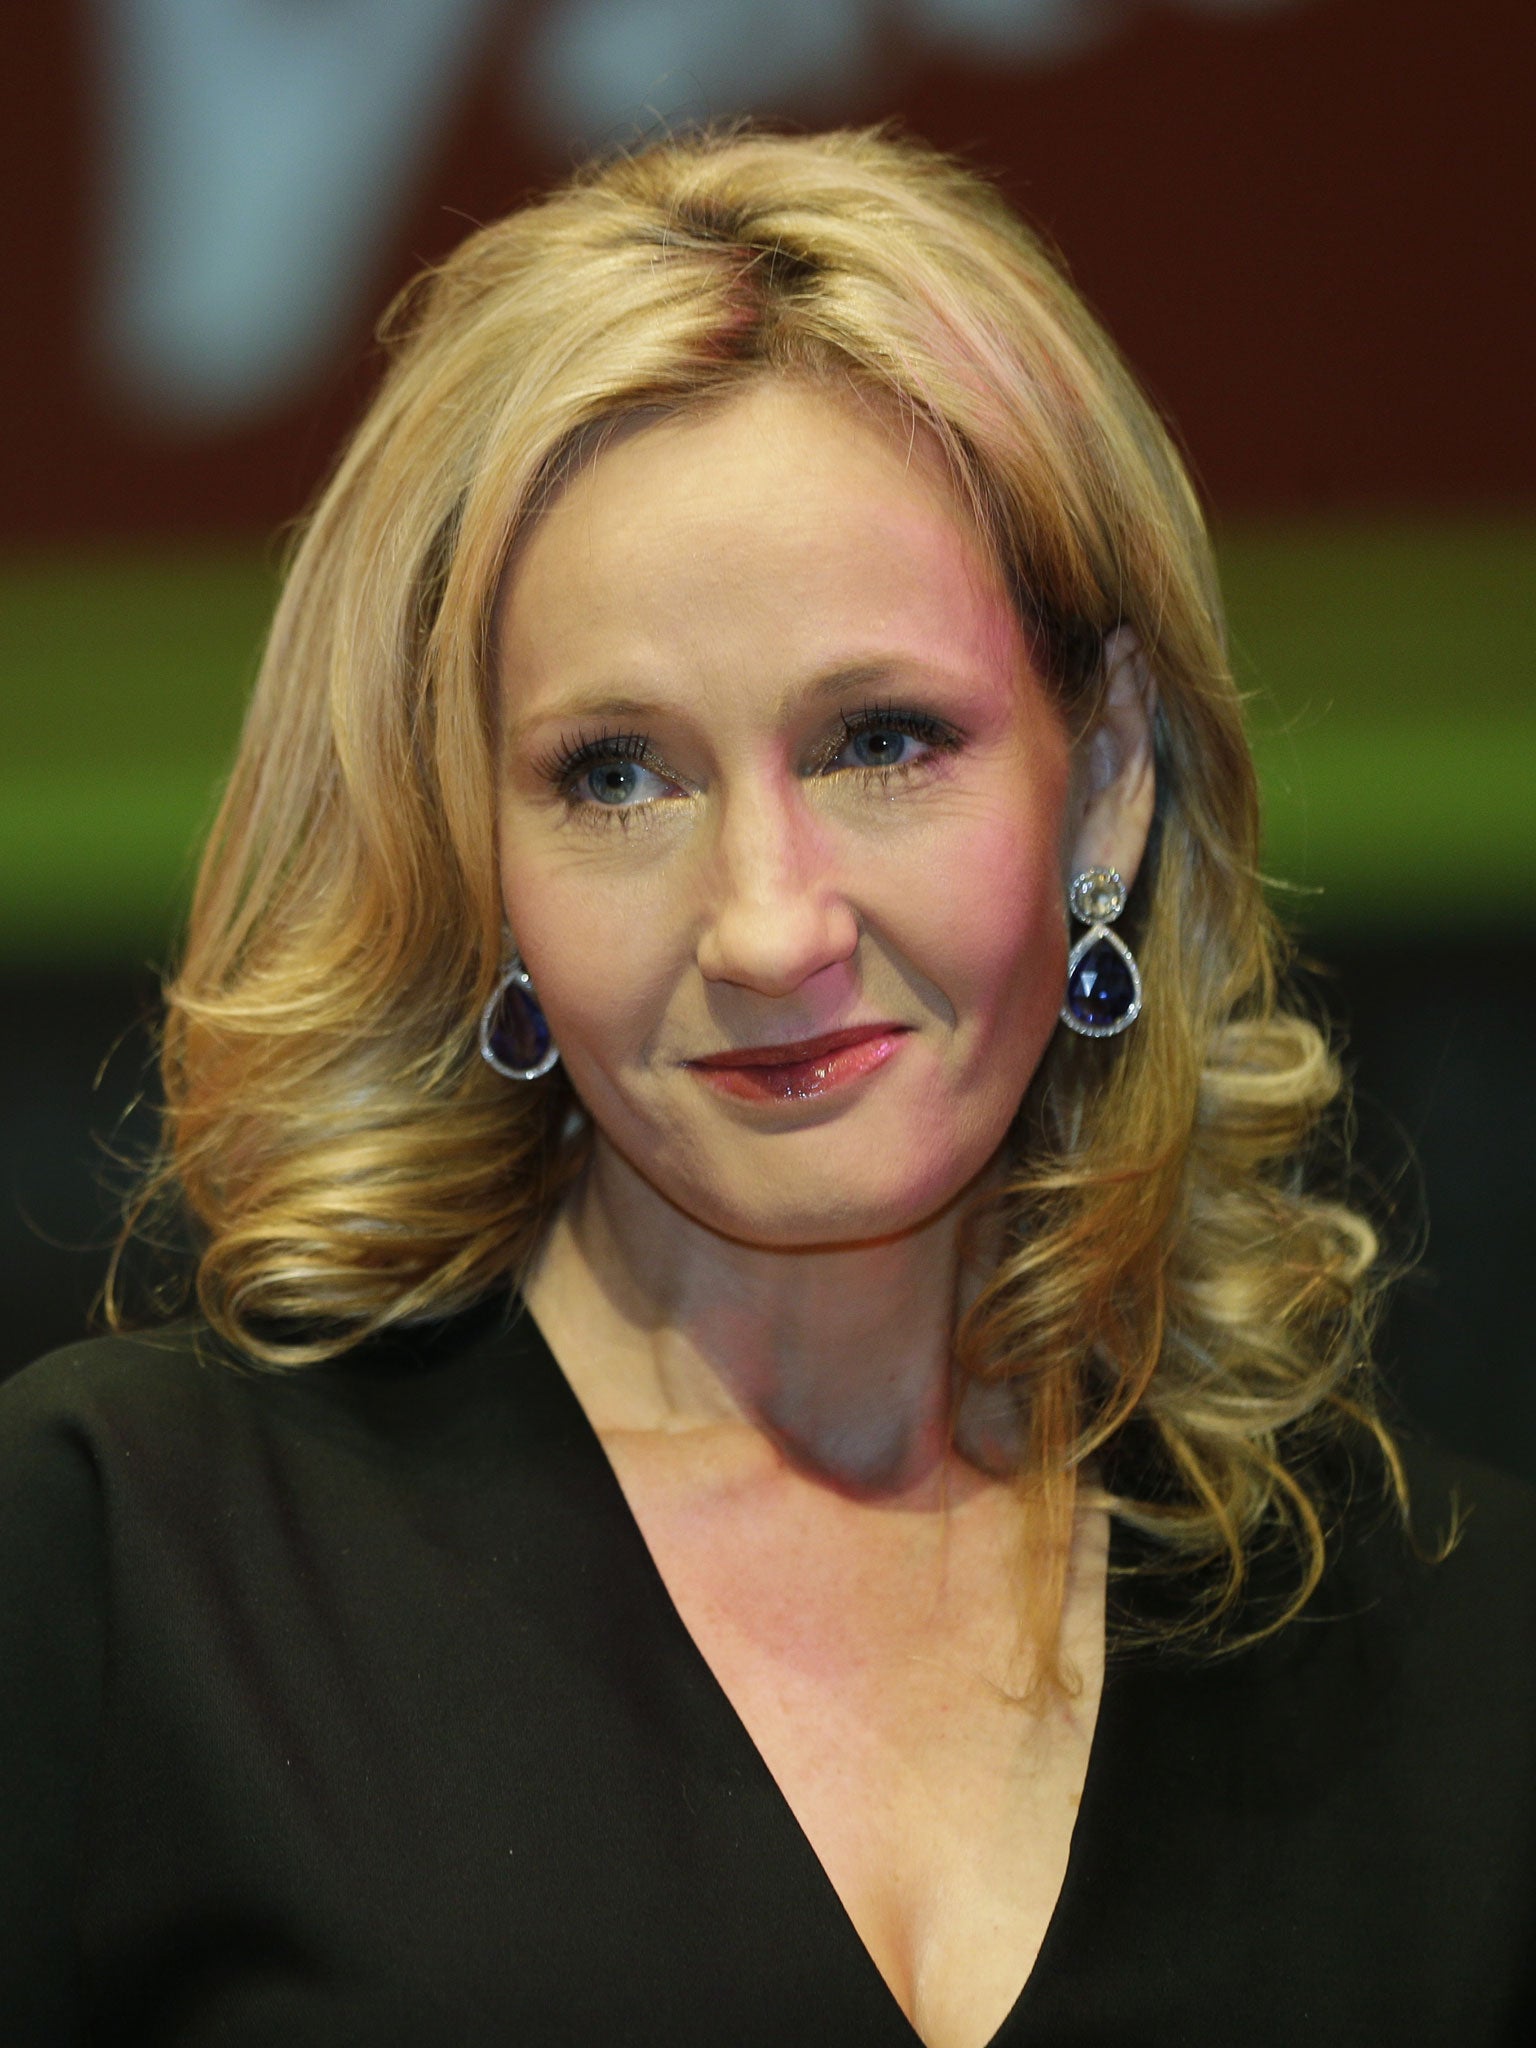 JK Rowling offered her latest work under a pseudonym to other publishers but was rejected